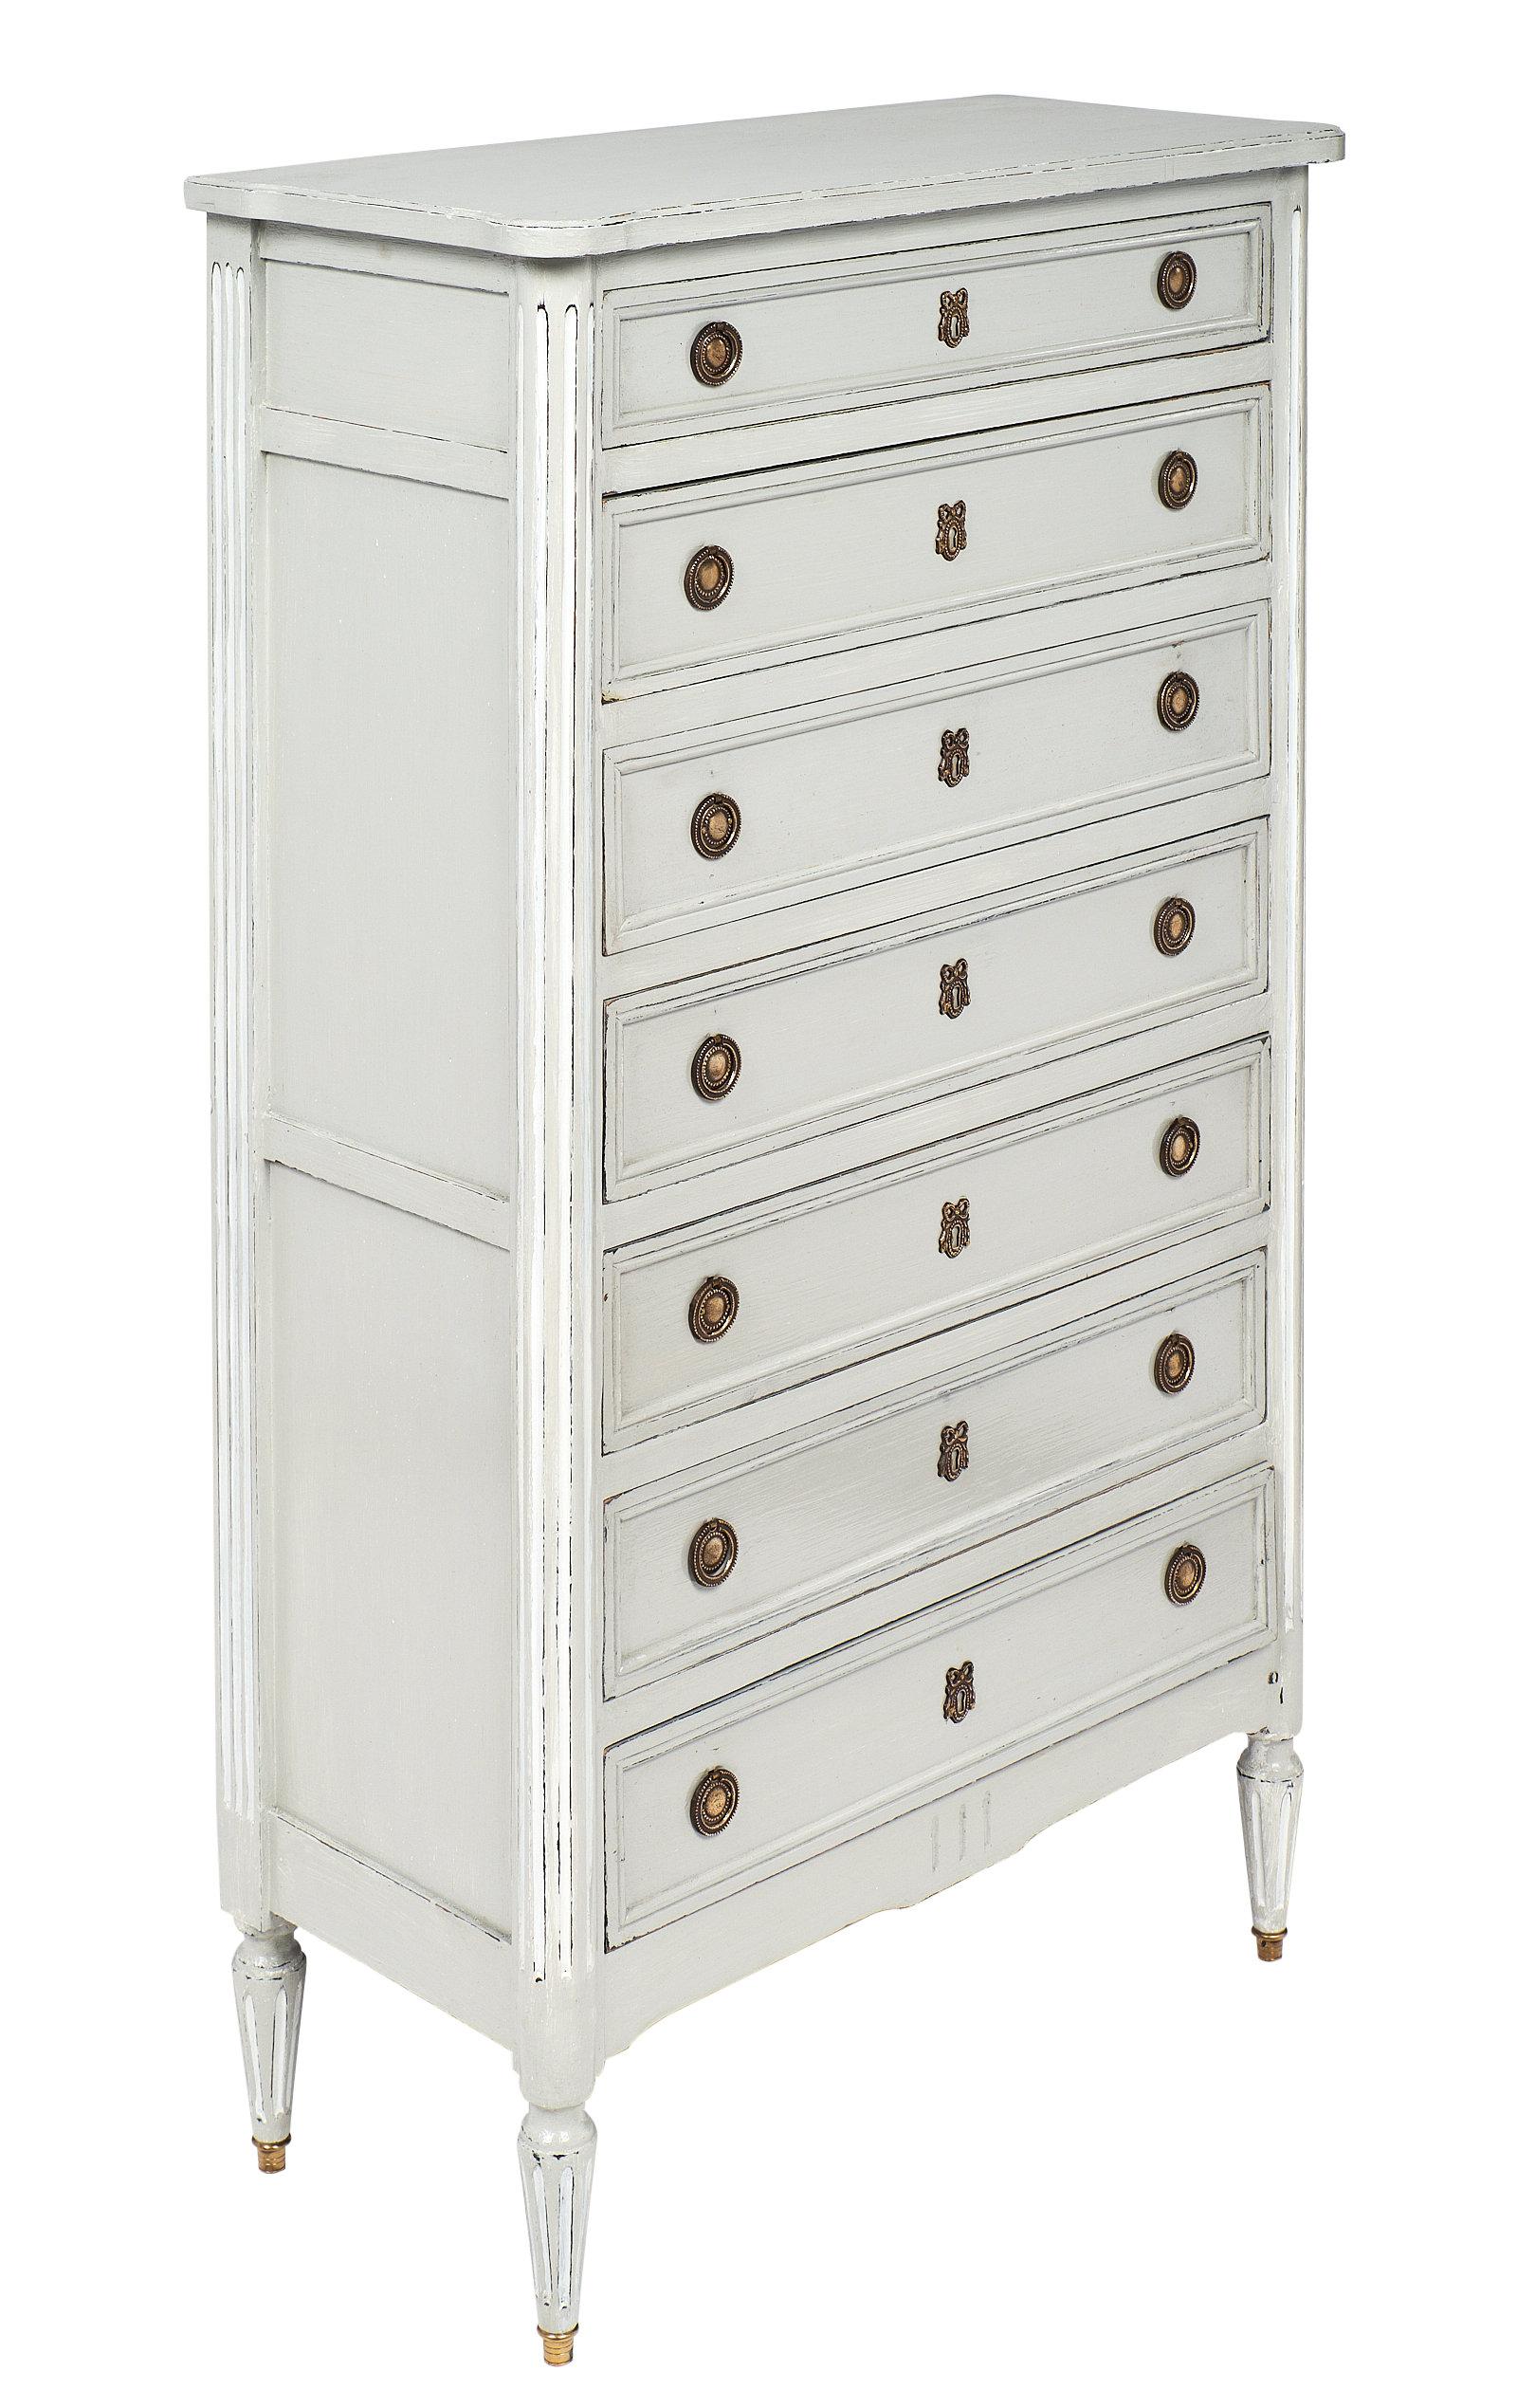 French antique painted semainier made of cheerywood in the Louis XVI style. The word “semaine” means week in French, and the seven dovetailed drawers on these cabinets feature one drawer per day of the week. The hand-painted Trianon gray color